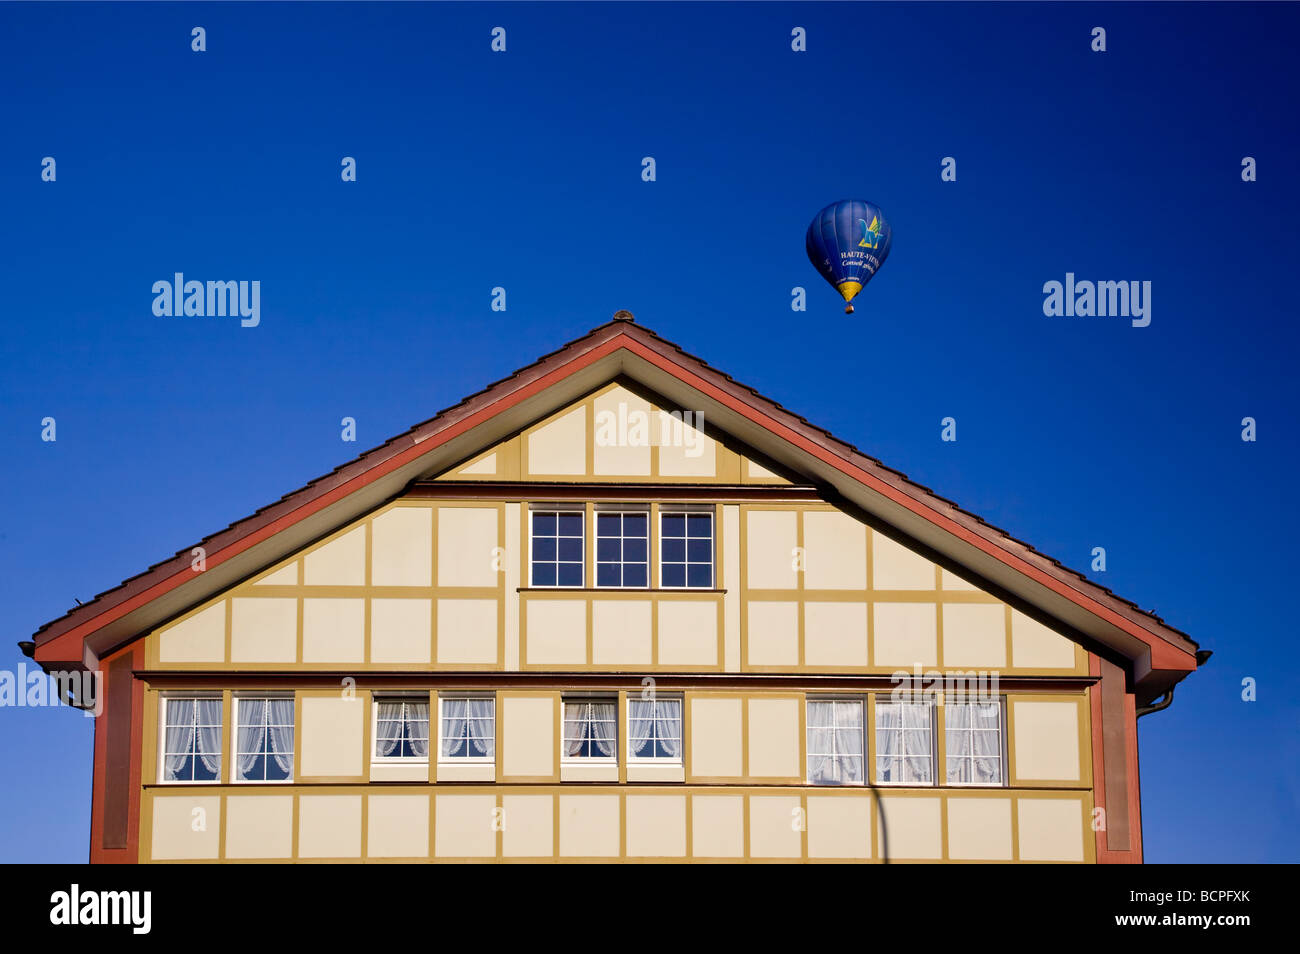 Hot air balloon taking off over traditional Appenzell house, Switzerland Stock Photo